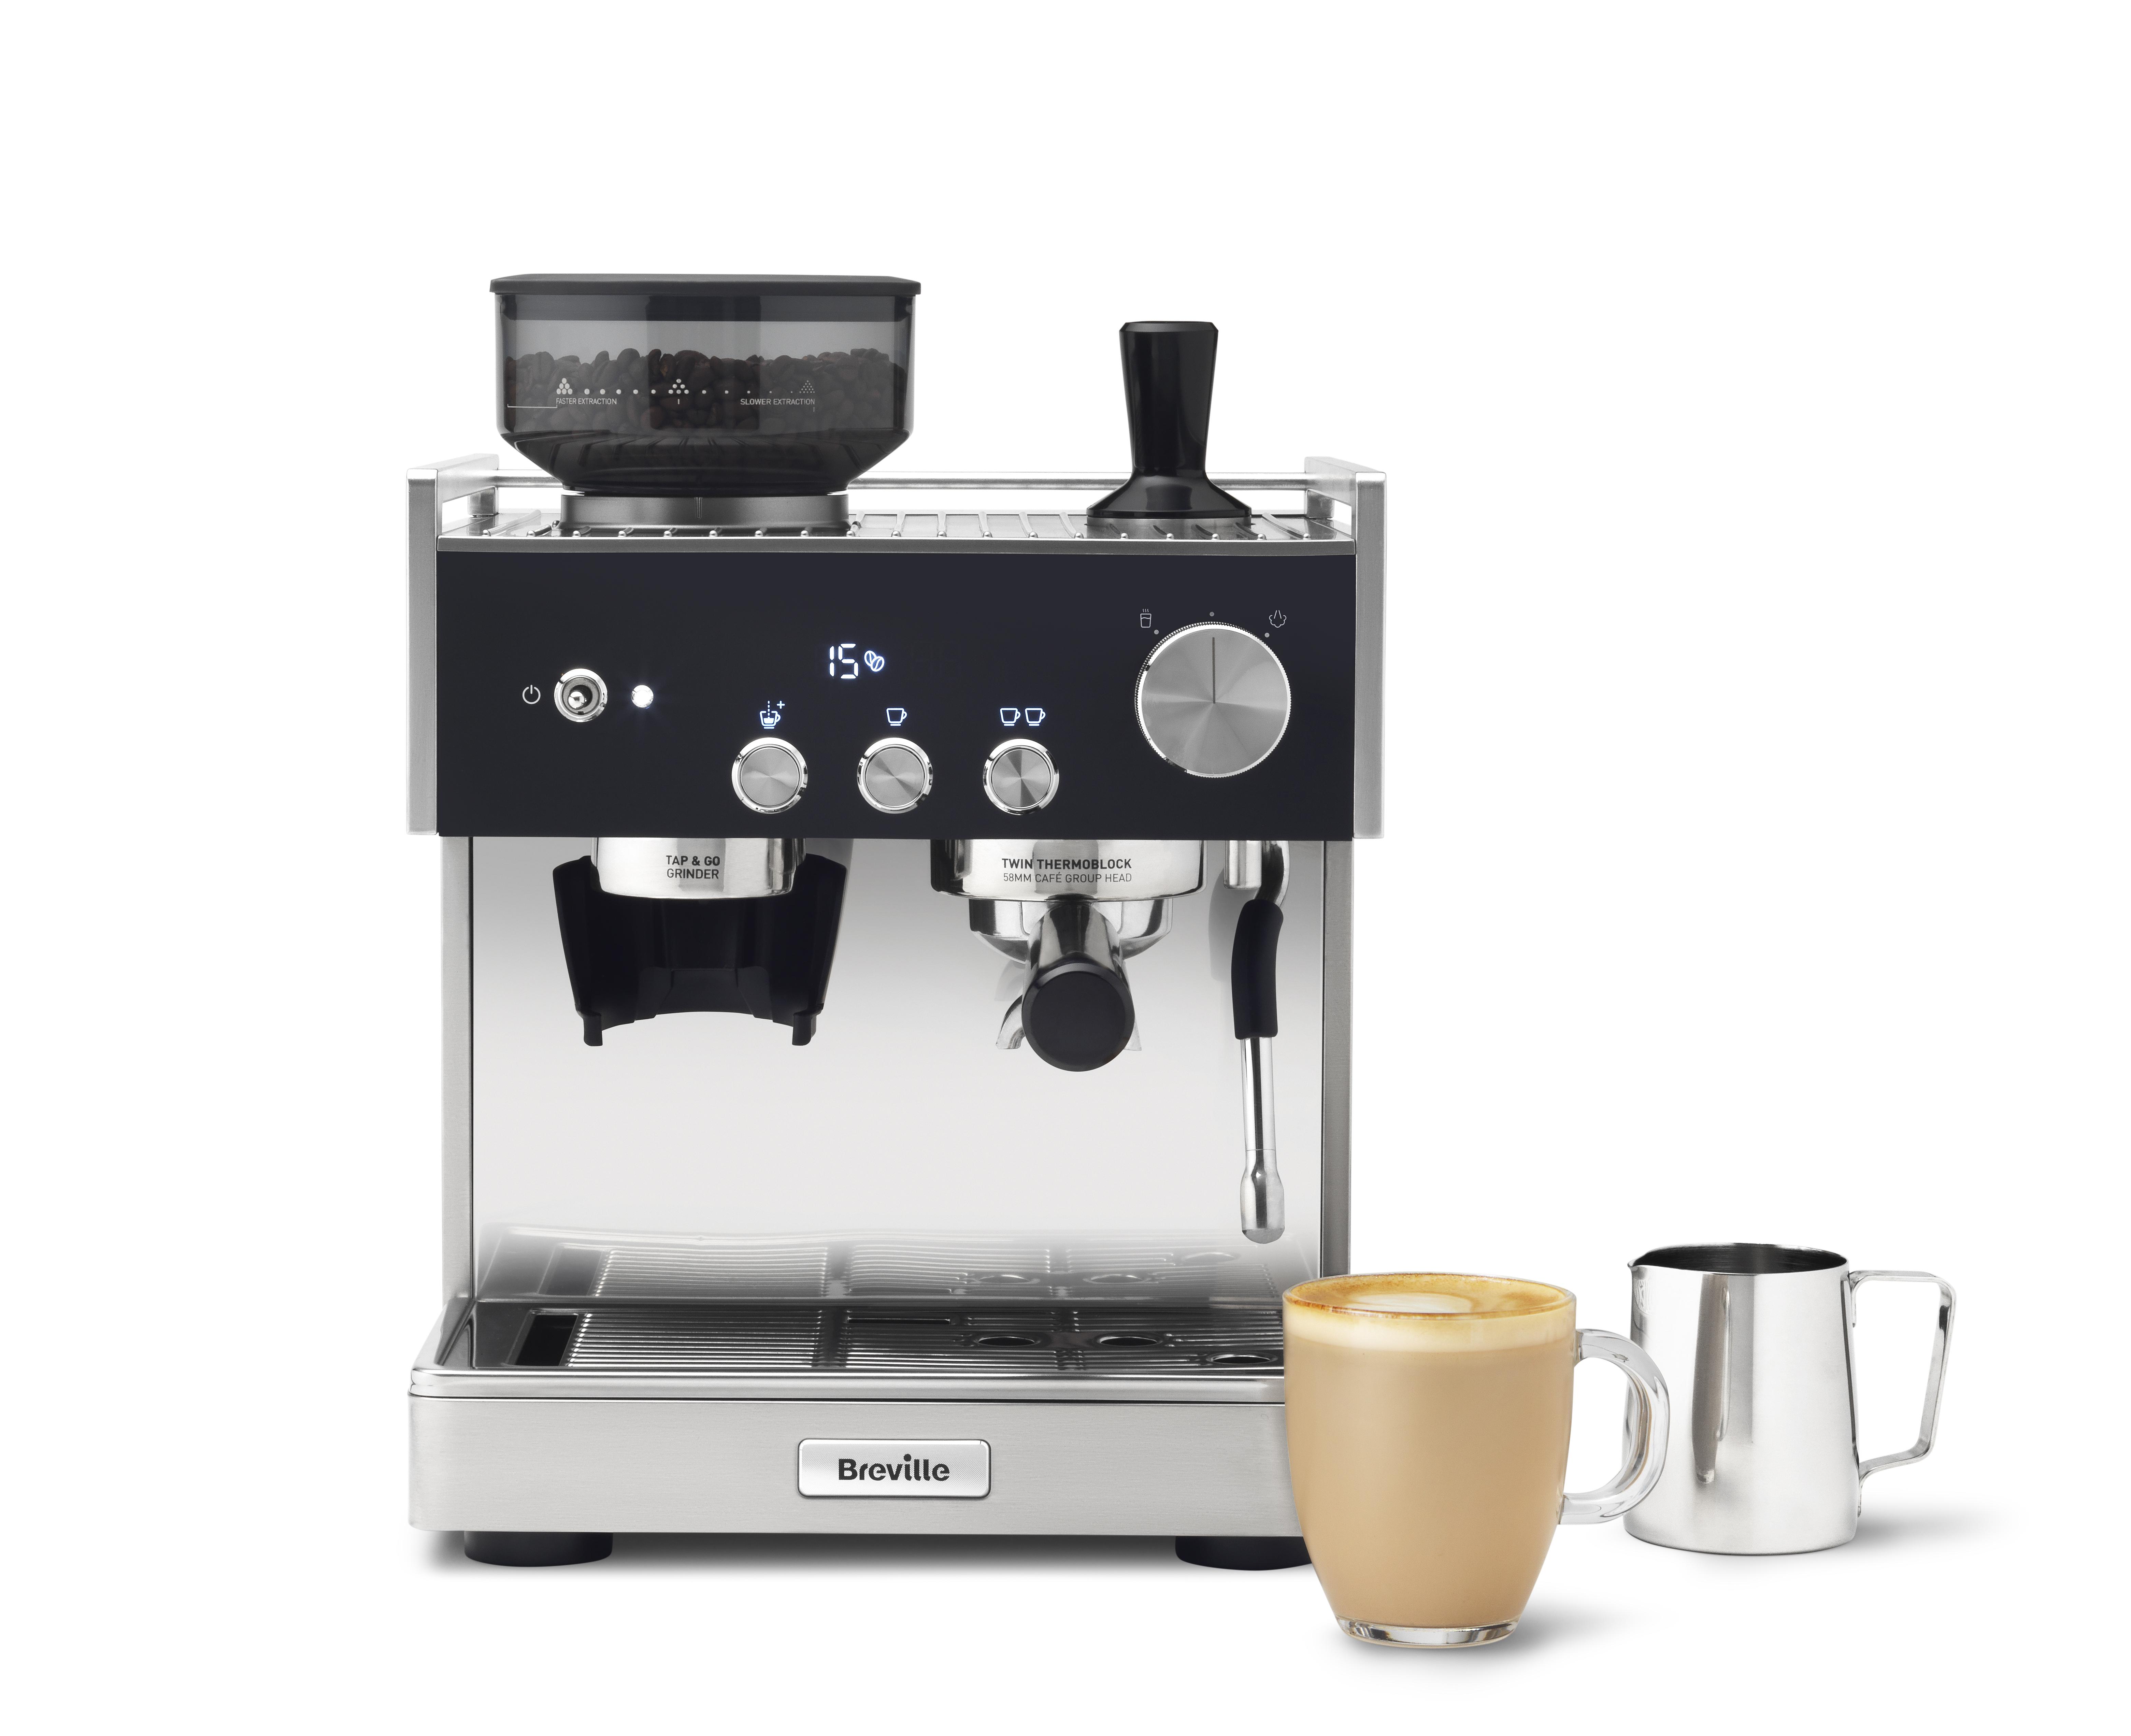 BREVILLE Barista Signature Espresso VCF160 Bean to Cup Coffee Machine - Stainless Steel, Stainless S